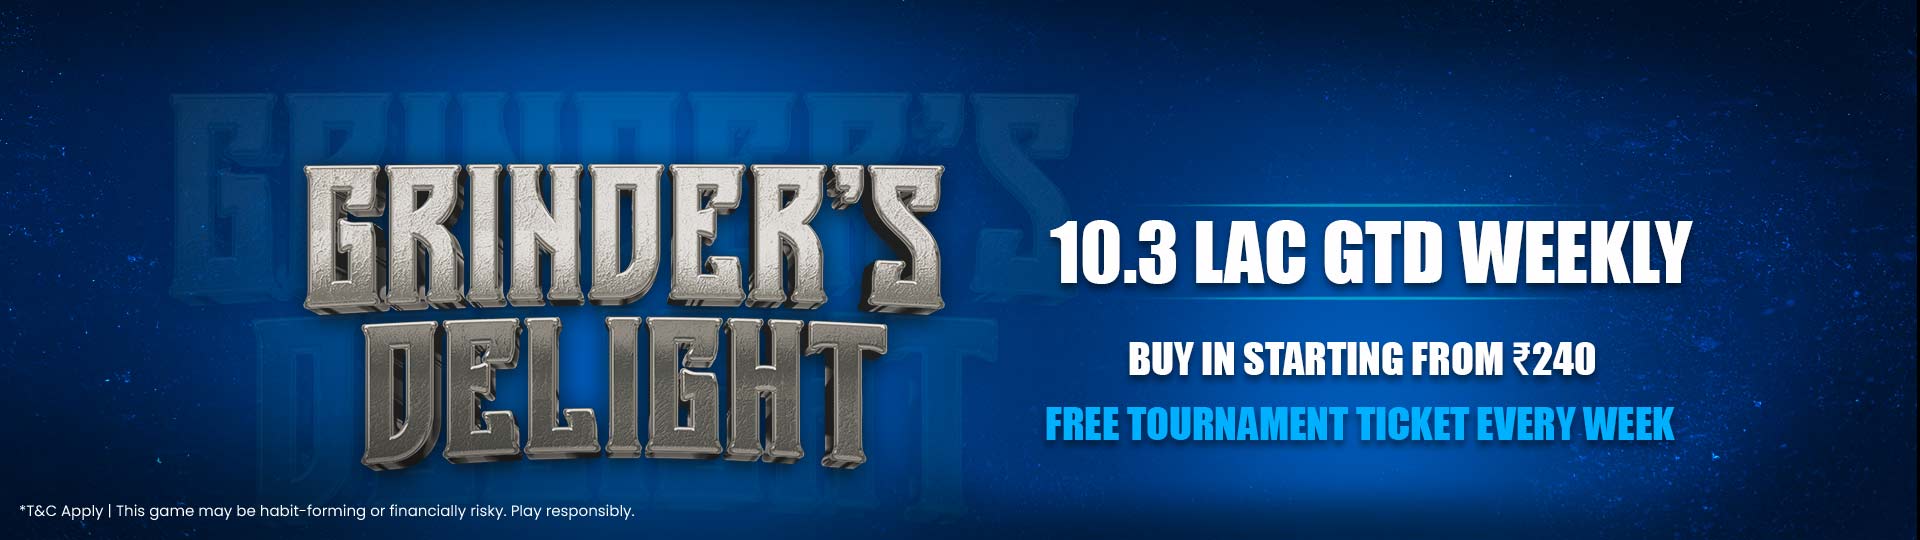 Grinder's Delight with 10.3 Lac GTD & buy in starting from 240.